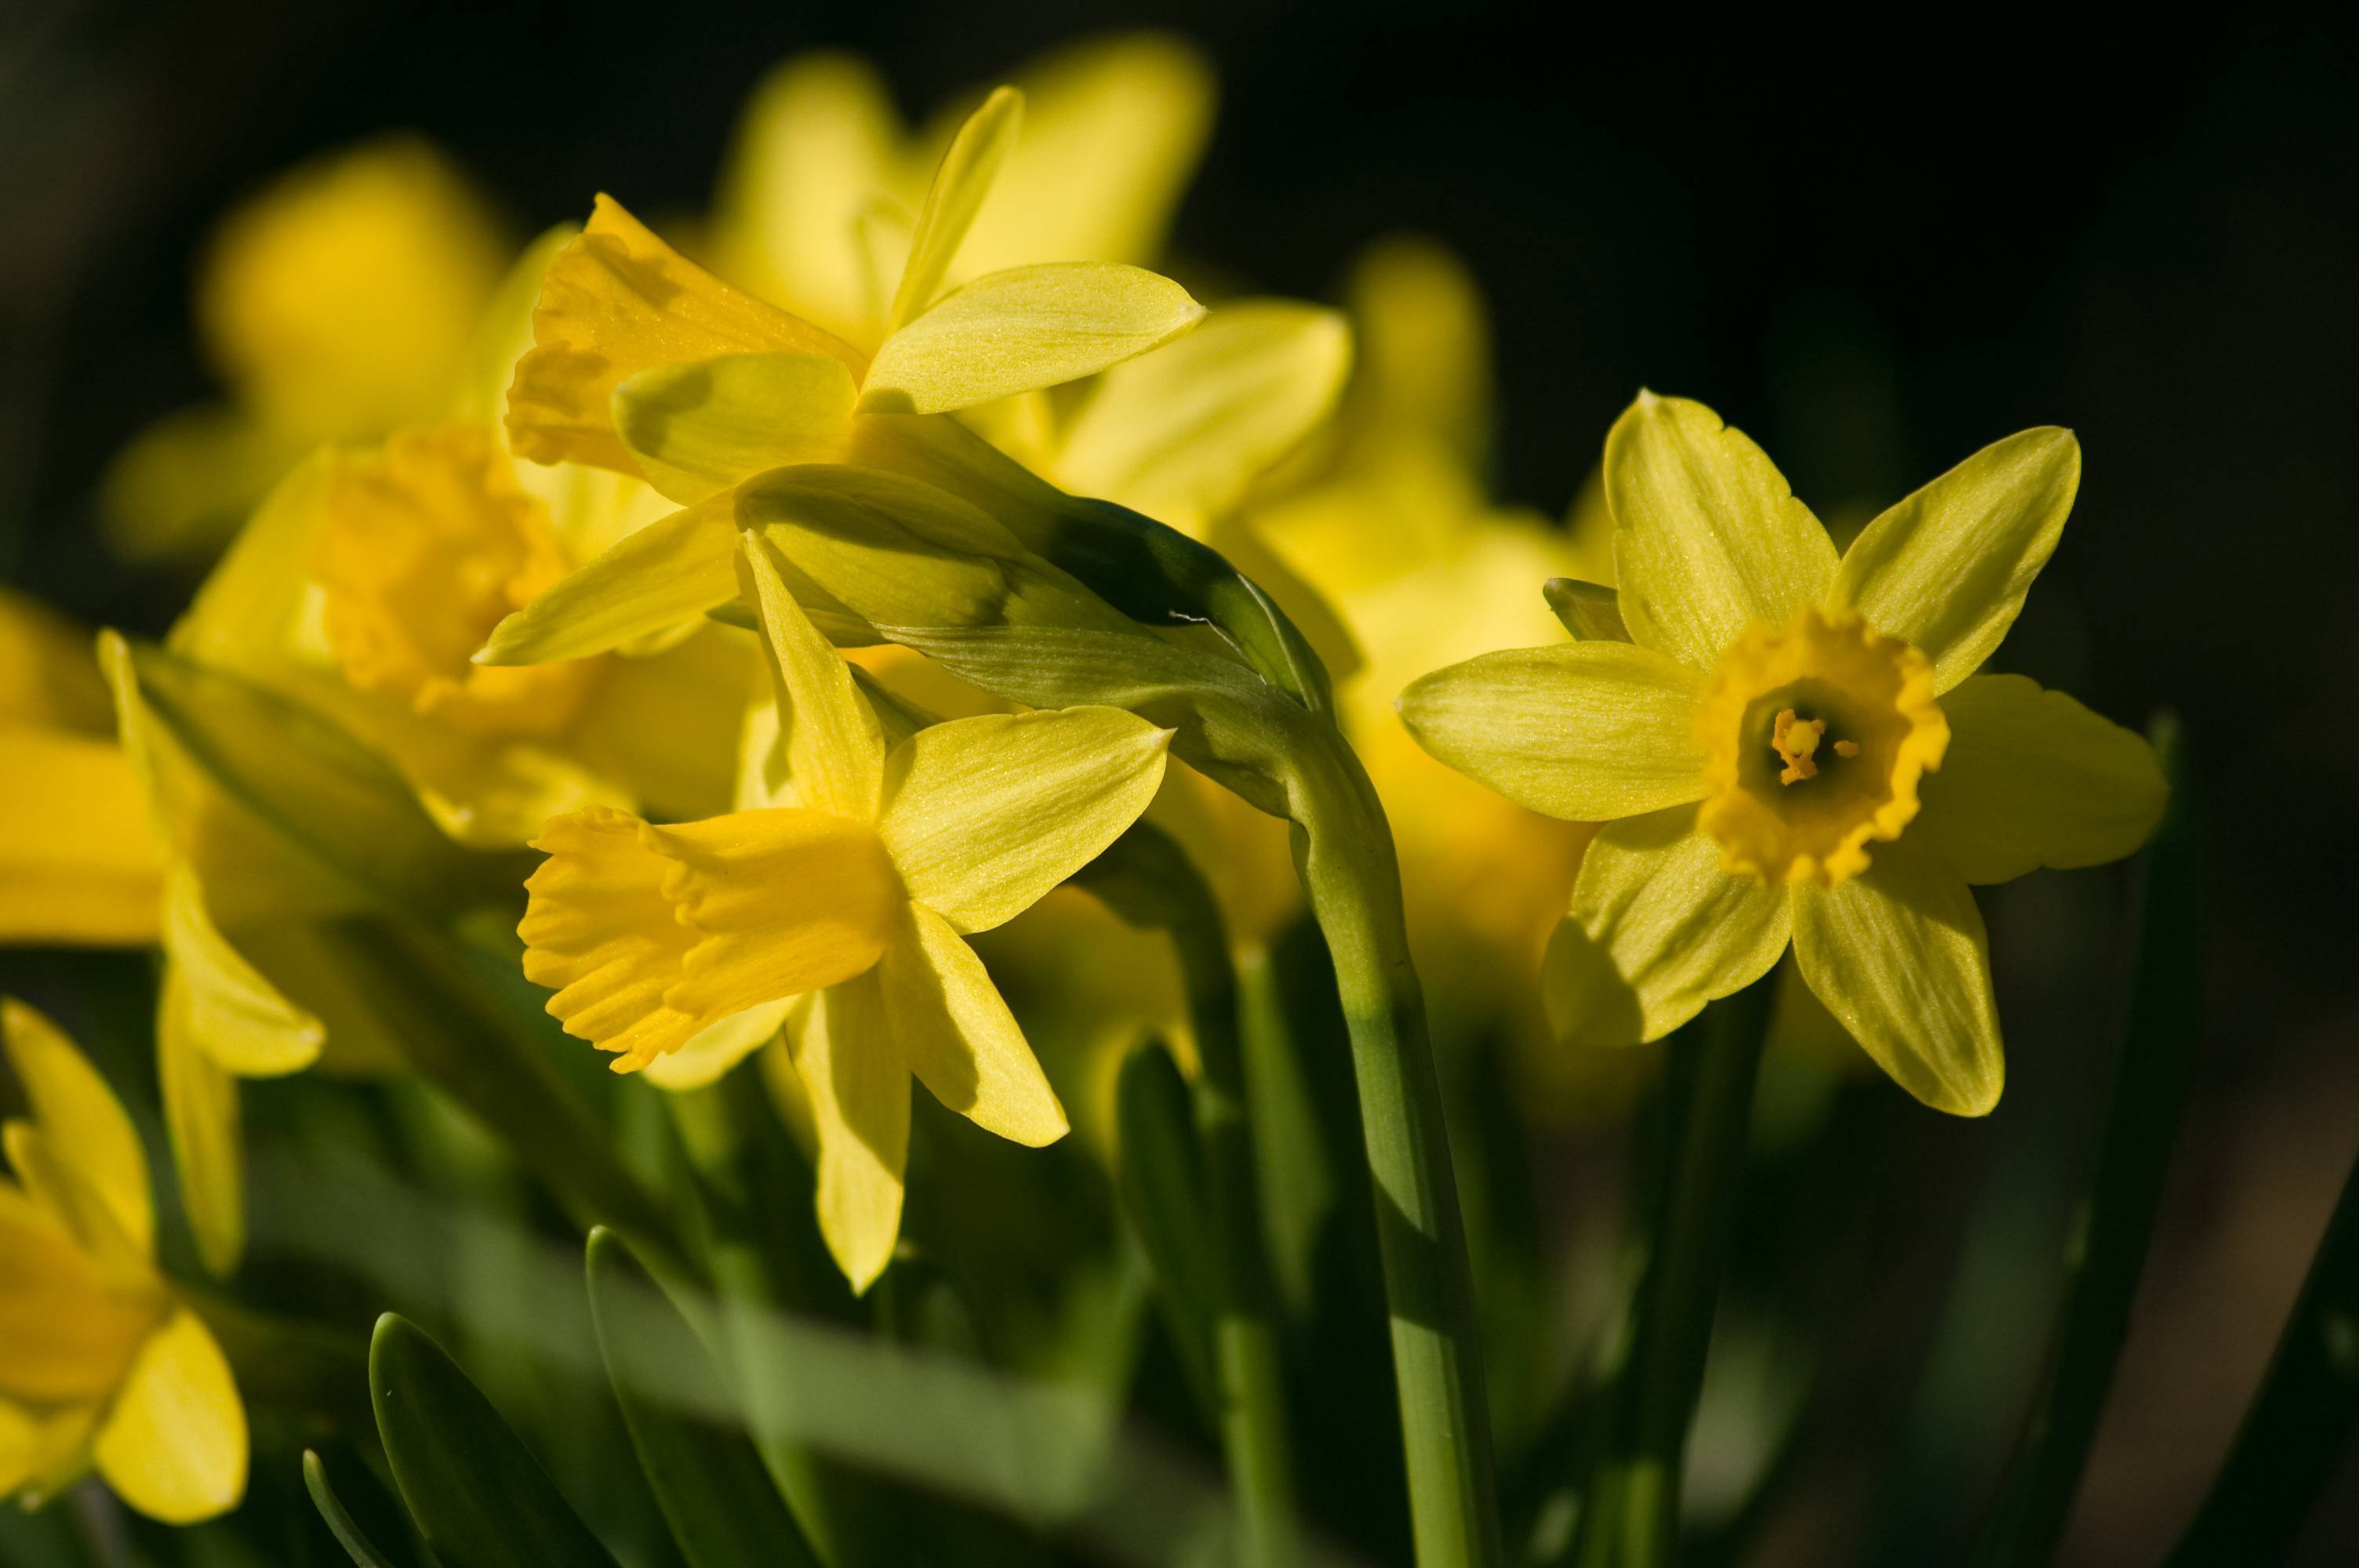 
Narcissus 'Carrickbeg'; yellow, shiny flowers with yellow, cup-like, corona, yellow stamens, yellow-green sepals, and dark-green, narrow, smooth leaves
